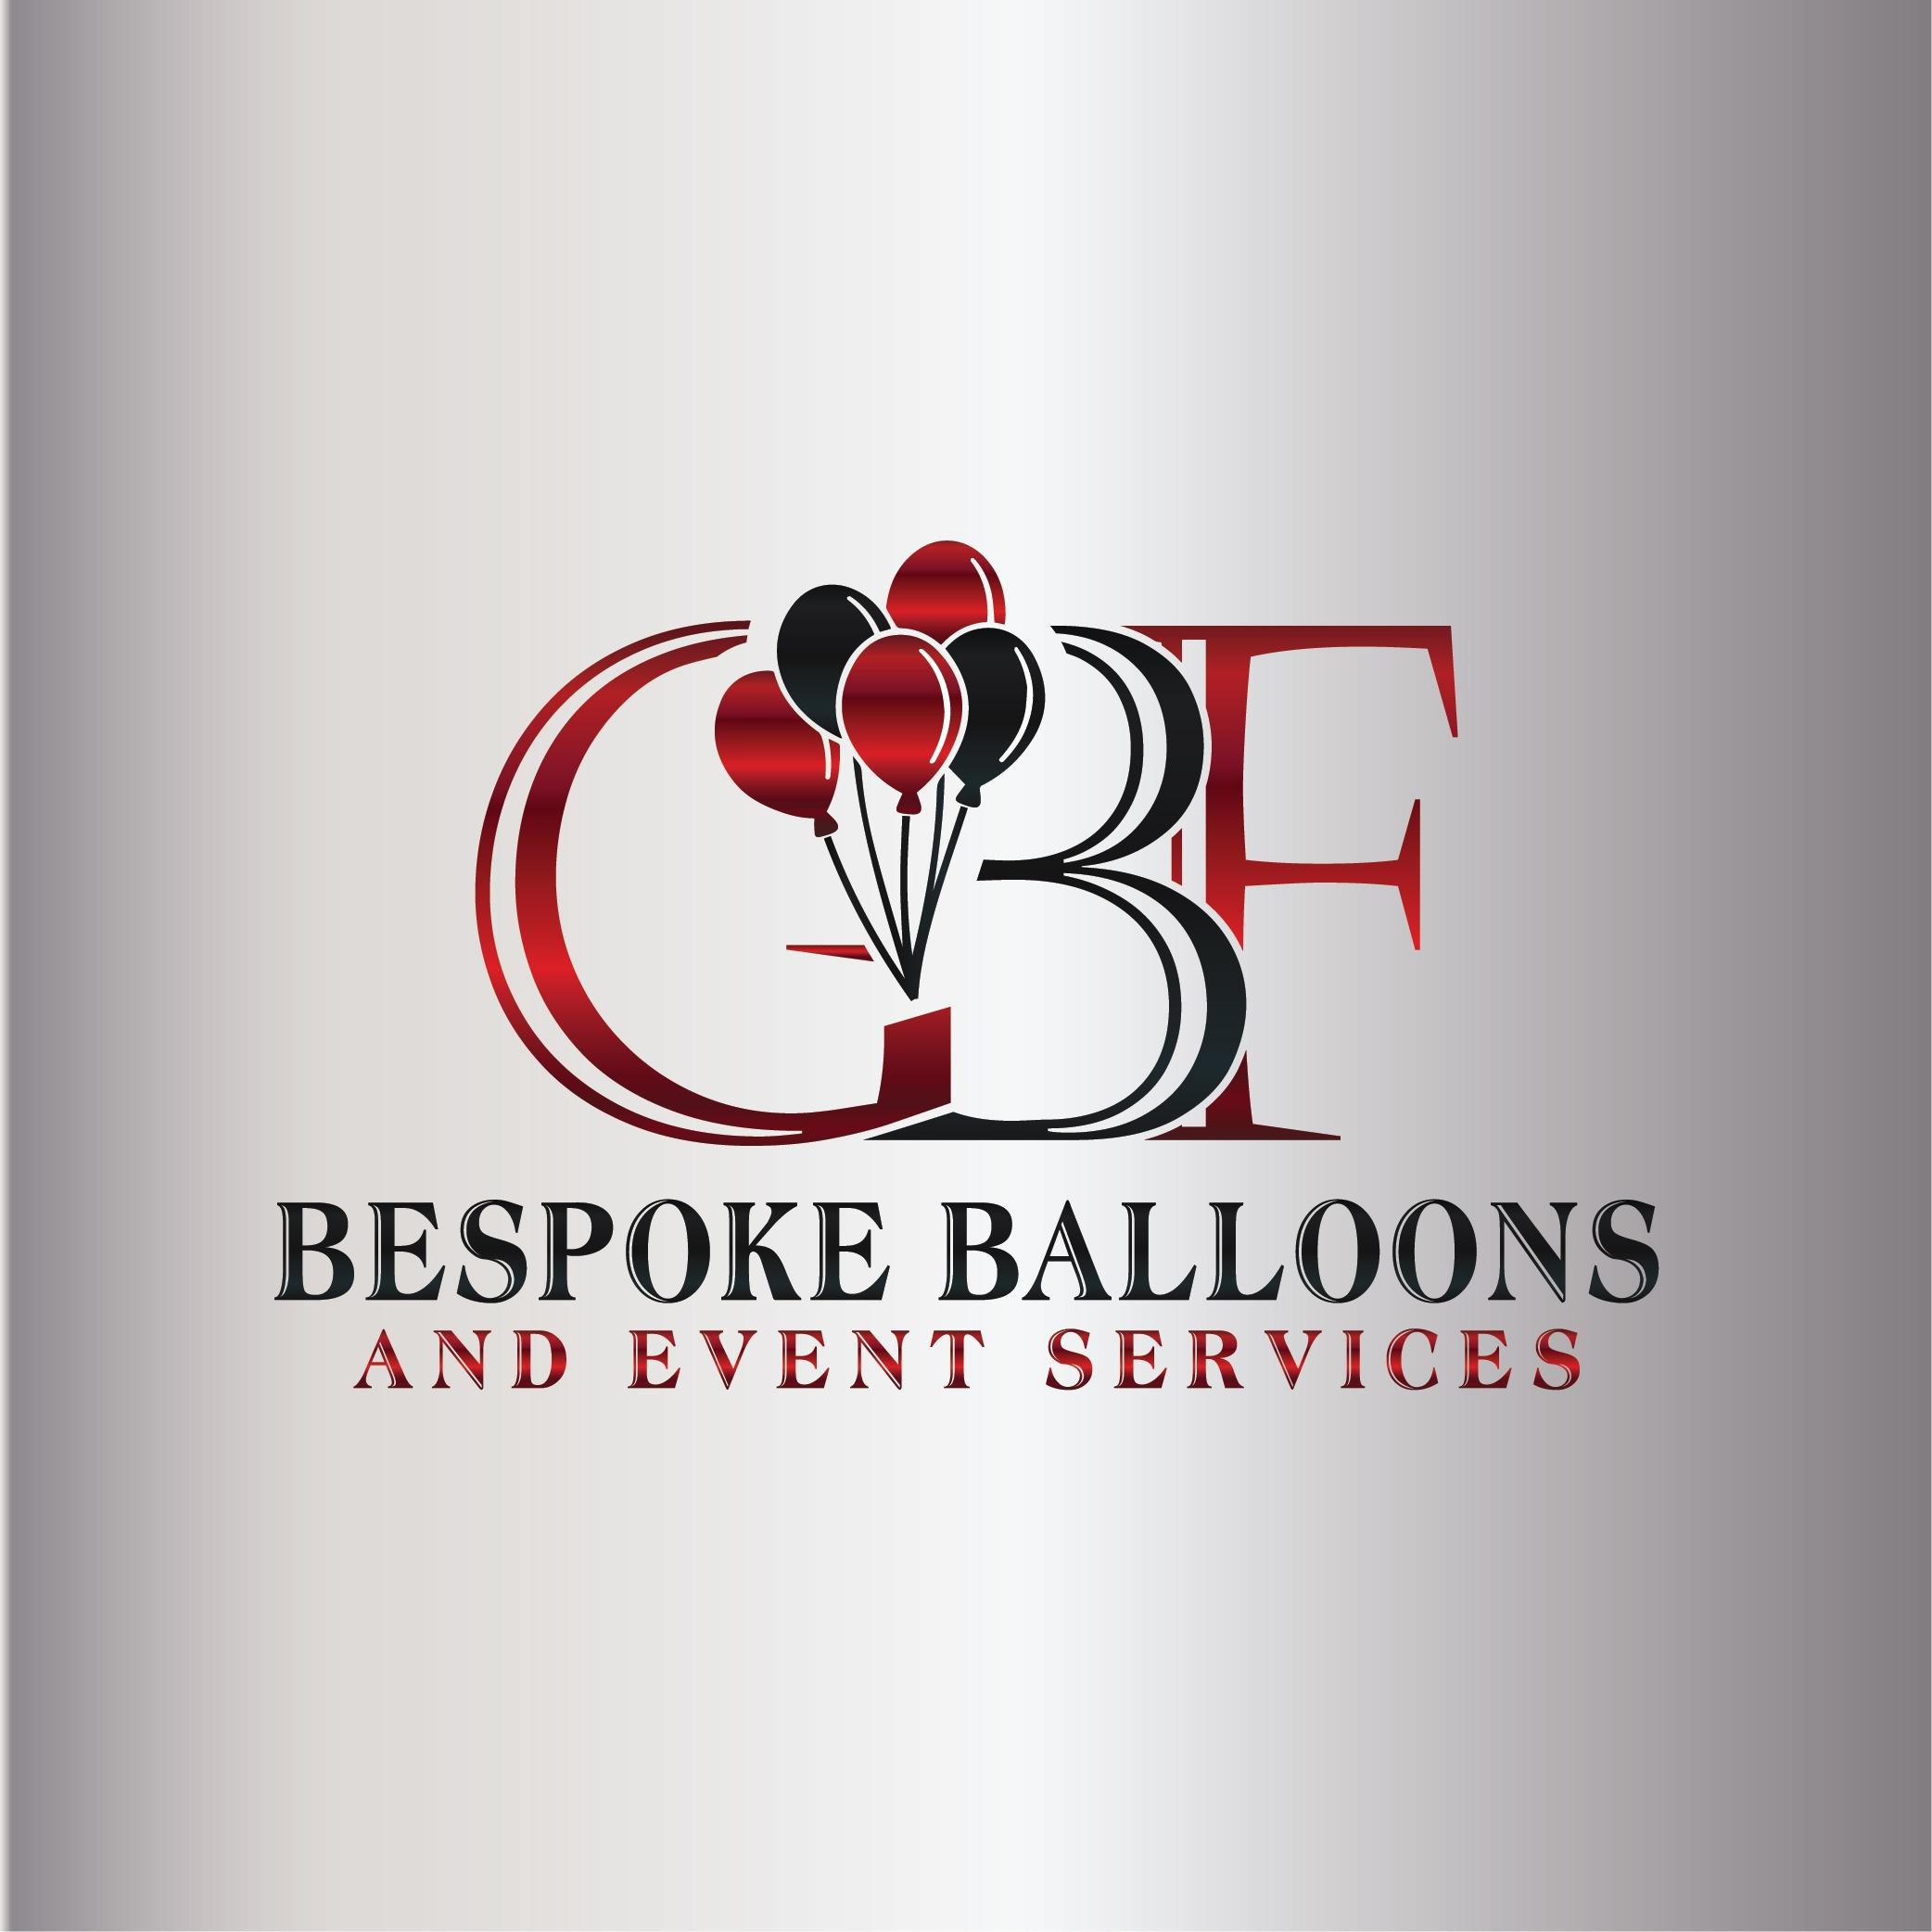 GBF Bespoke Balloons and Event Services, LLC. - Waukesha, WI 53186 - (262)349-9067 | ShowMeLocal.com